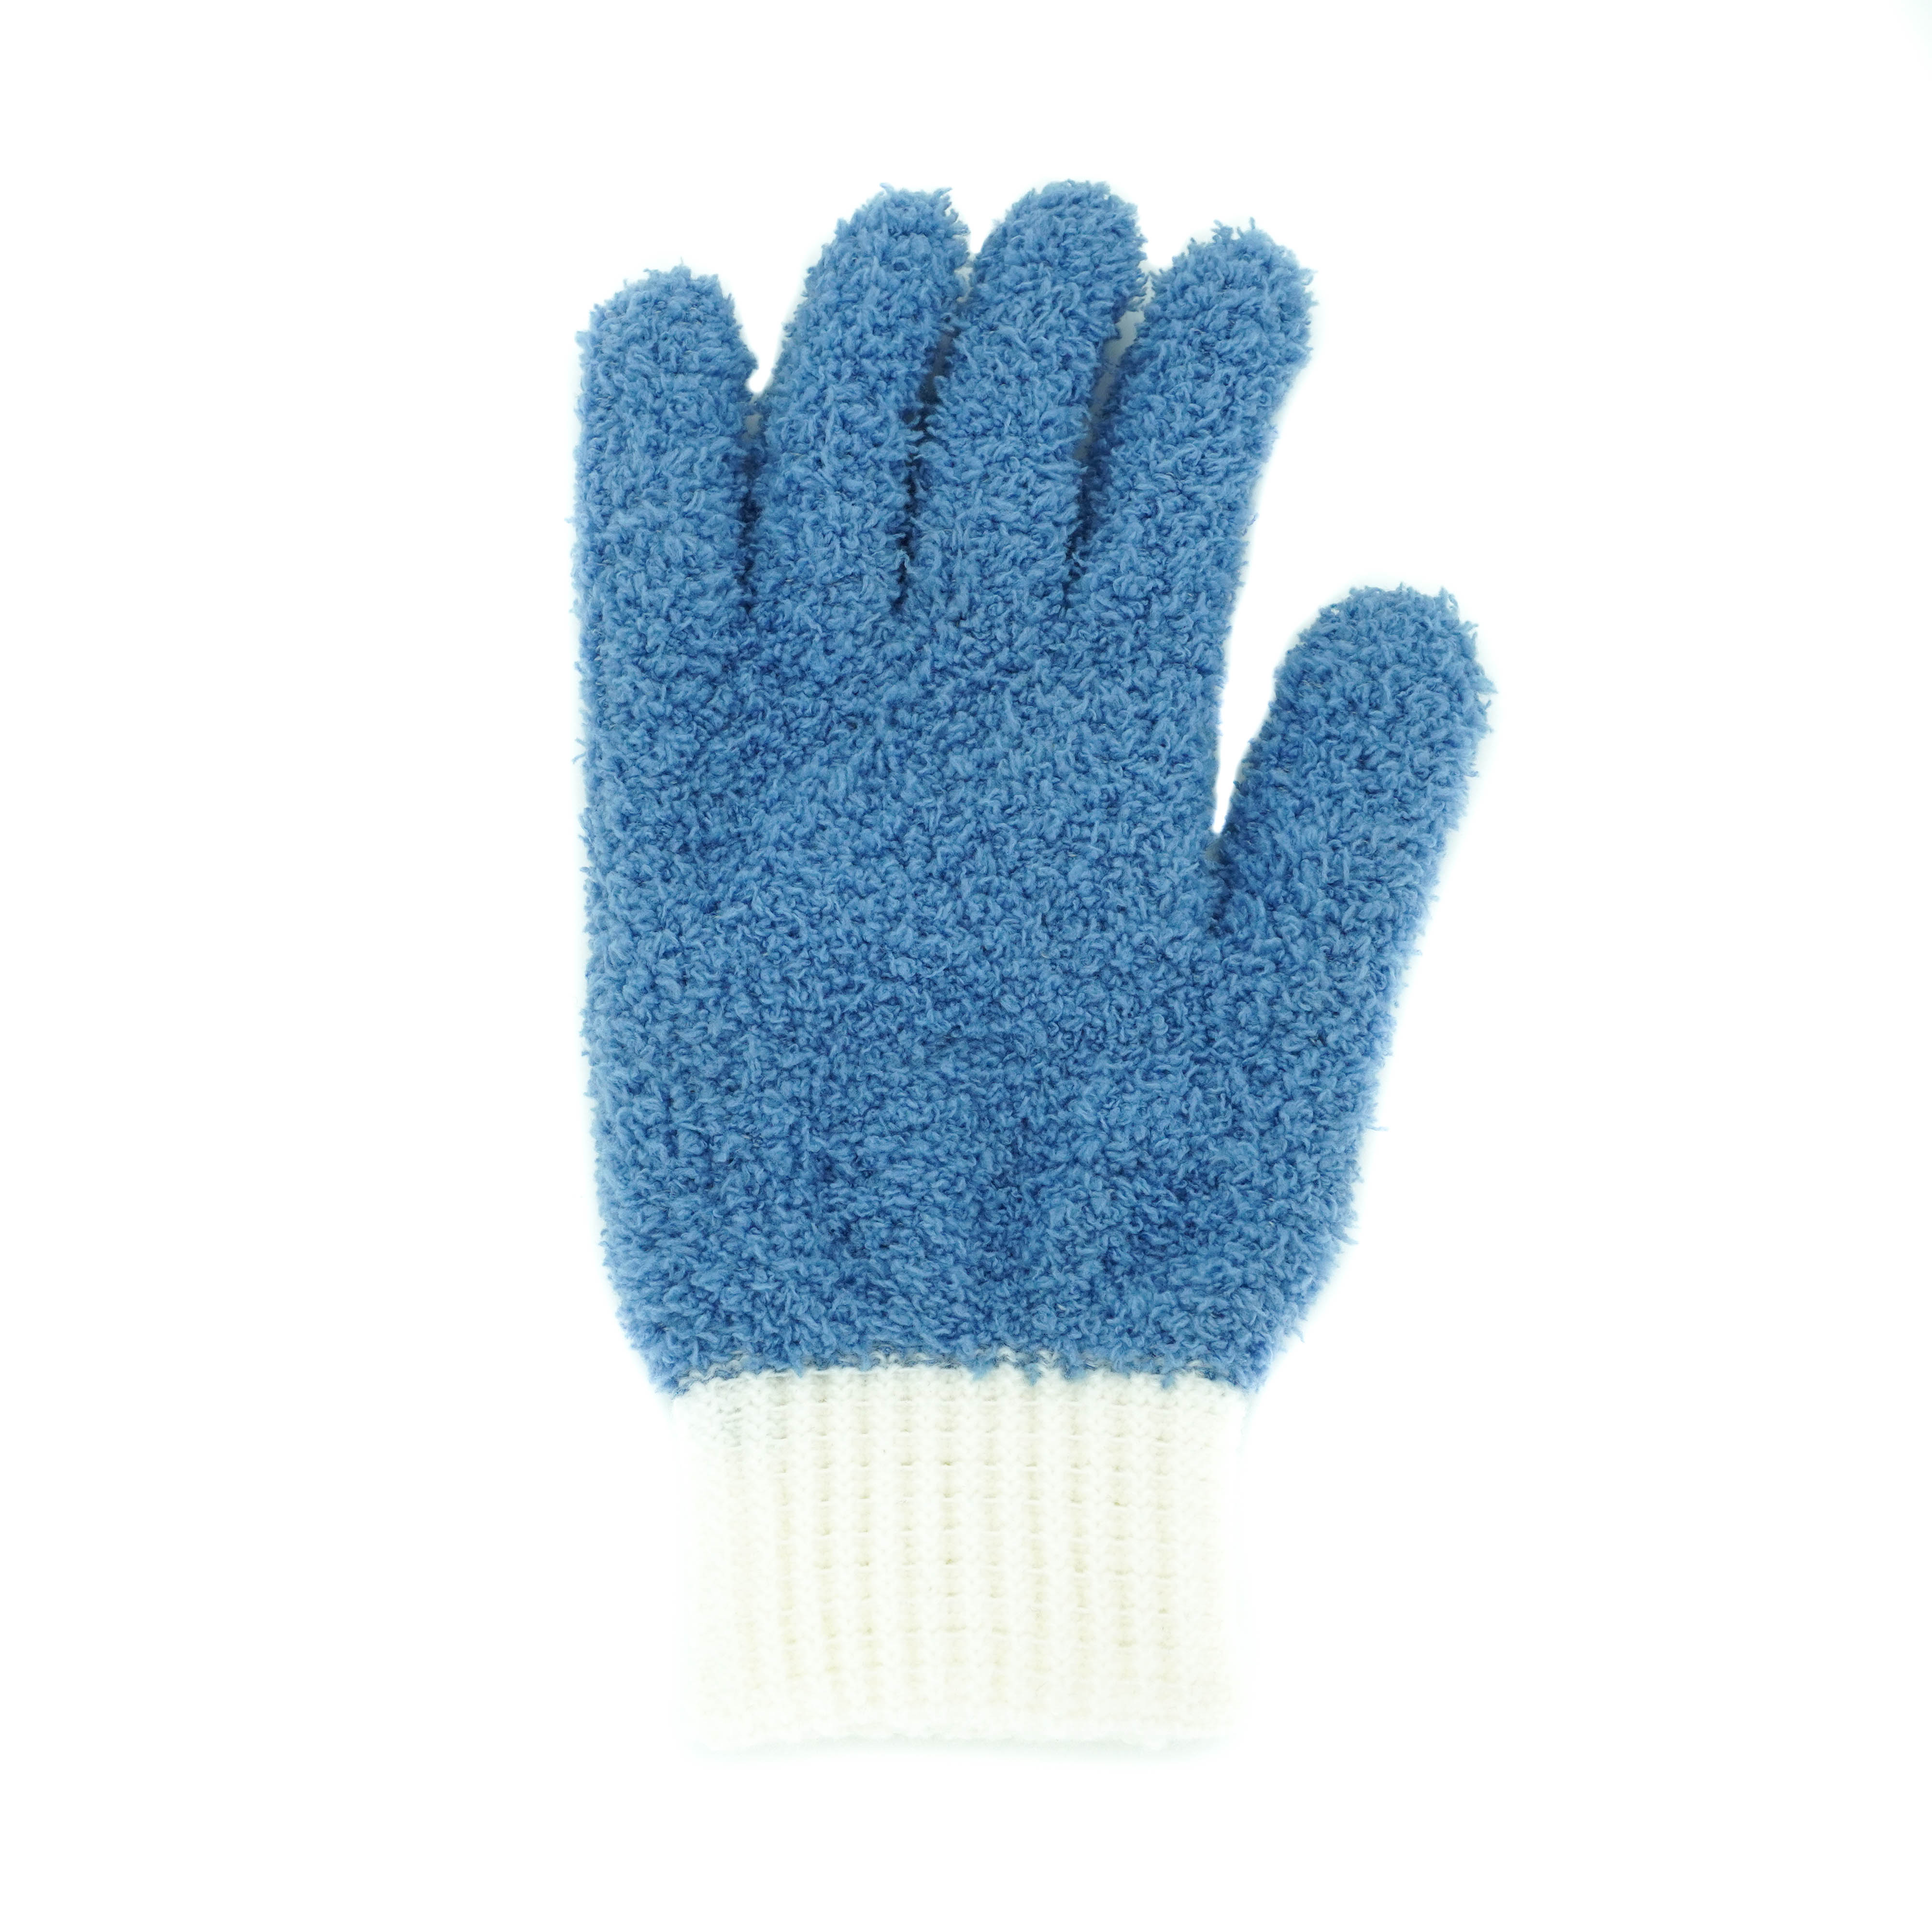 OEM/ODM China Lambswool Wash Mitt - Microfiber Auto Dusting Cleaning Gloves for Cars and Trucks, Dust Cleaning Gloves for House Cleaning, Perfect to Clean Mirrors, Lamps and Blinds – Weavers